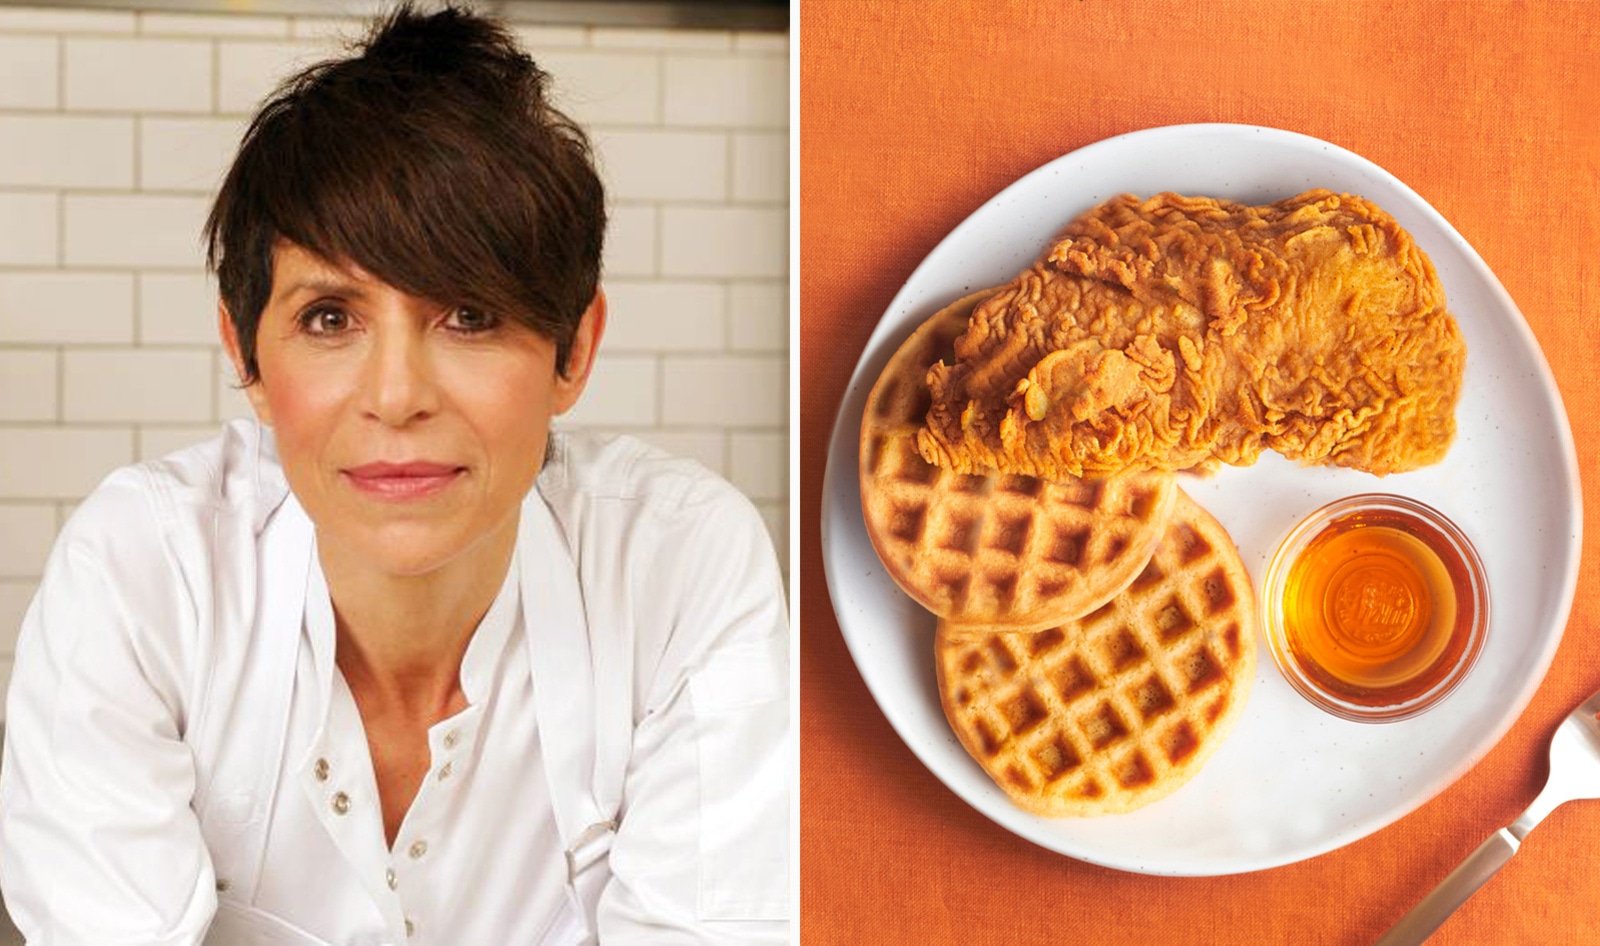 Dominique Crenn, the First Female US Chef to Get Three Michelin Stars, Now Aims to Be the First to Serve Lab-Grown Chicken